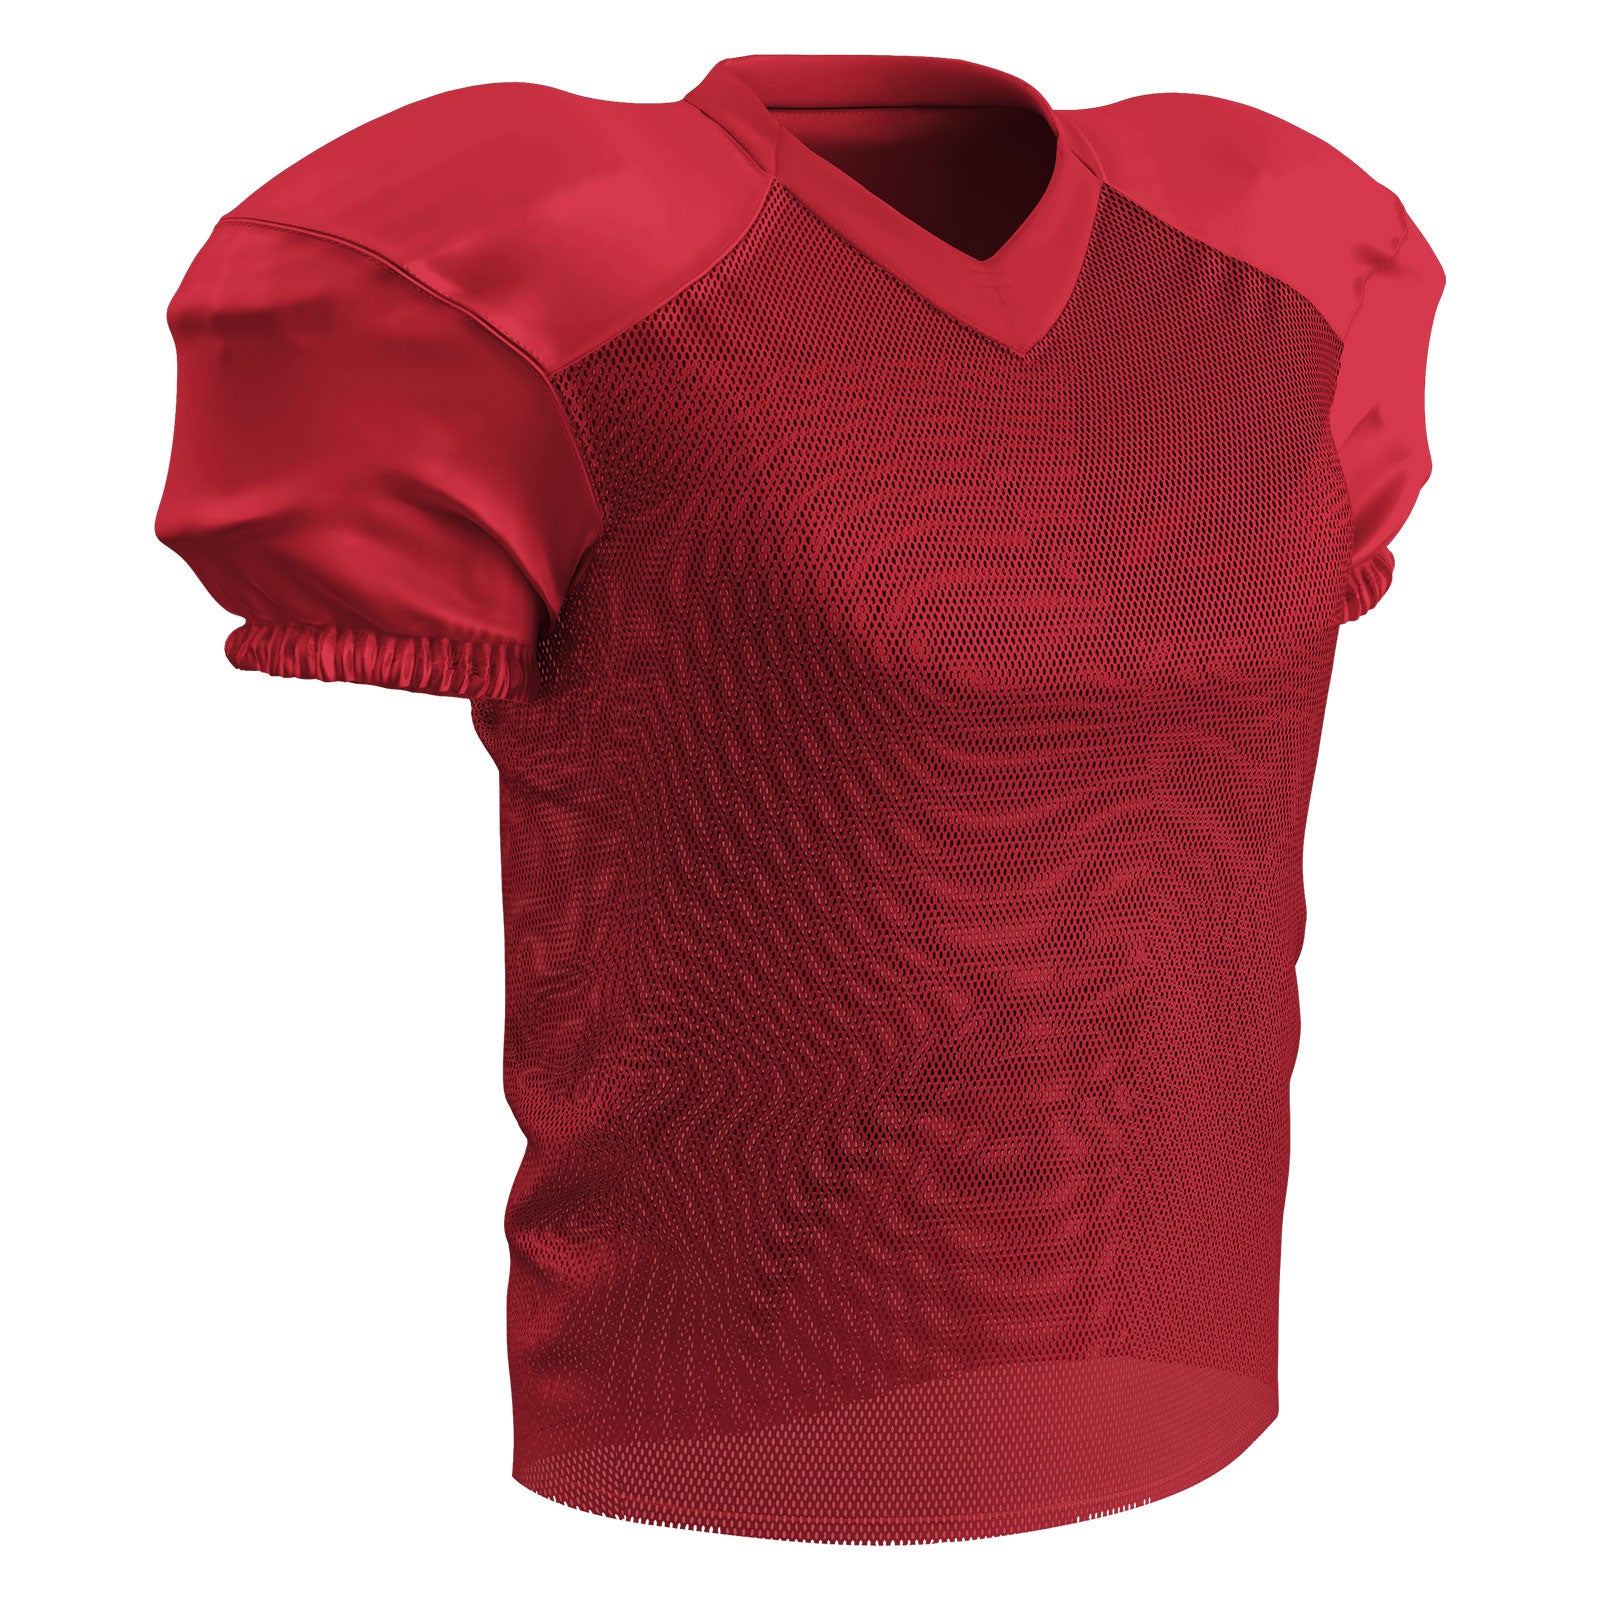 Waist Length Solid Practice Football Jersey SCARLET BODY